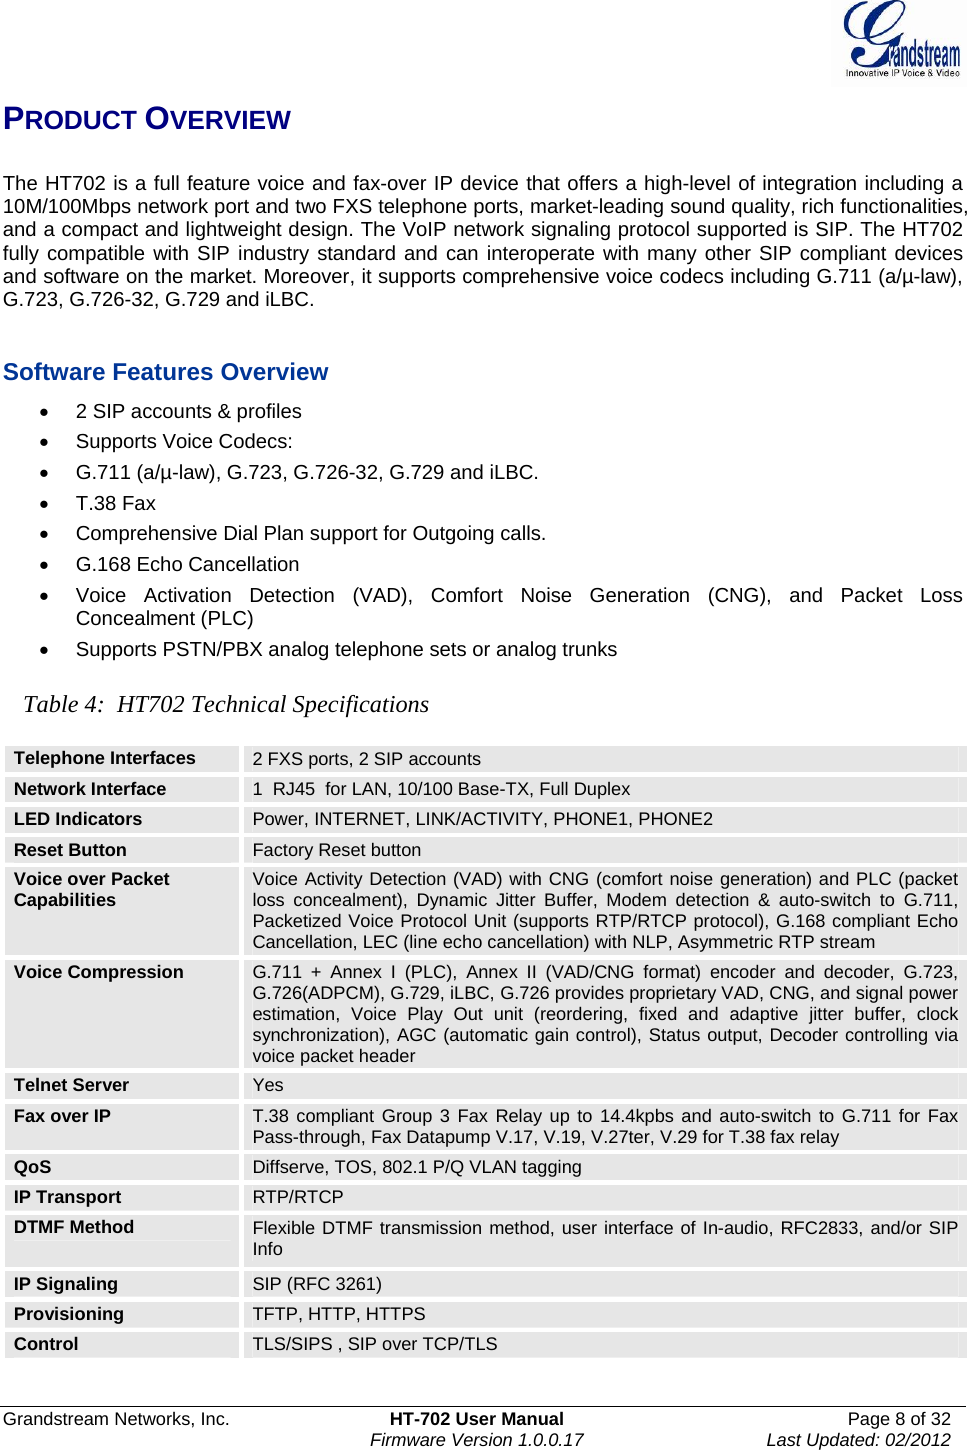  Grandstream Networks, Inc.  HT-702 User Manual  Page 8 of 32    Firmware Version 1.0.0.17  Last Updated: 02/2012  PRODUCT OVERVIEW  The HT702 is a full feature voice and fax-over IP device that offers a high-level of integration including a 10M/100Mbps network port and two FXS telephone ports, market-leading sound quality, rich functionalities, and a compact and lightweight design. The VoIP network signaling protocol supported is SIP. The HT702 fully compatible with SIP industry standard and can interoperate with many other SIP compliant devices and software on the market. Moreover, it supports comprehensive voice codecs including G.711 (a/µ-law), G.723, G.726-32, G.729 and iLBC.   Software Features Overview •  2 SIP accounts &amp; profiles • Supports Voice Codecs:  •  G.711 (a/µ-law), G.723, G.726-32, G.729 and iLBC. •  T.38 Fax  •  Comprehensive Dial Plan support for Outgoing calls. • G.168 Echo Cancellation •  Voice Activation Detection (VAD), Comfort Noise Generation (CNG), and Packet Loss Concealment (PLC) •  Supports PSTN/PBX analog telephone sets or analog trunks  Table 4:  HT702 Technical Specifications  Telephone Interfaces  2 FXS ports, 2 SIP accounts Network Interface  1  RJ45  for LAN, 10/100 Base-TX, Full Duplex LED Indicators  Power, INTERNET, LINK/ACTIVITY, PHONE1, PHONE2 Reset Button  Factory Reset button Voice over Packet Capabilities  Voice Activity Detection (VAD) with CNG (comfort noise generation) and PLC (packet loss concealment), Dynamic Jitter Buffer, Modem detection &amp; auto-switch to G.711, Packetized Voice Protocol Unit (supports RTP/RTCP protocol), G.168 compliant Echo Cancellation, LEC (line echo cancellation) with NLP, Asymmetric RTP stream Voice Compression  G.711 + Annex I (PLC), Annex II (VAD/CNG format) encoder and decoder, G.723, G.726(ADPCM), G.729, iLBC, G.726 provides proprietary VAD, CNG, and signal power estimation, Voice Play Out unit (reordering, fixed and adaptive jitter buffer, clock synchronization), AGC (automatic gain control), Status output, Decoder controlling via voice packet header Telnet Server  Yes Fax over IP  T.38 compliant Group 3 Fax Relay up to 14.4kpbs and auto-switch to G.711 for Fax Pass-through, Fax Datapump V.17, V.19, V.27ter, V.29 for T.38 fax relay QoS  Diffserve, TOS, 802.1 P/Q VLAN tagging IP Transport  RTP/RTCP  DTMF Method  Flexible DTMF transmission method, user interface of In-audio, RFC2833, and/or SIP Info IP Signaling  SIP (RFC 3261) Provisioning  TFTP, HTTP, HTTPS Control  TLS/SIPS , SIP over TCP/TLS 